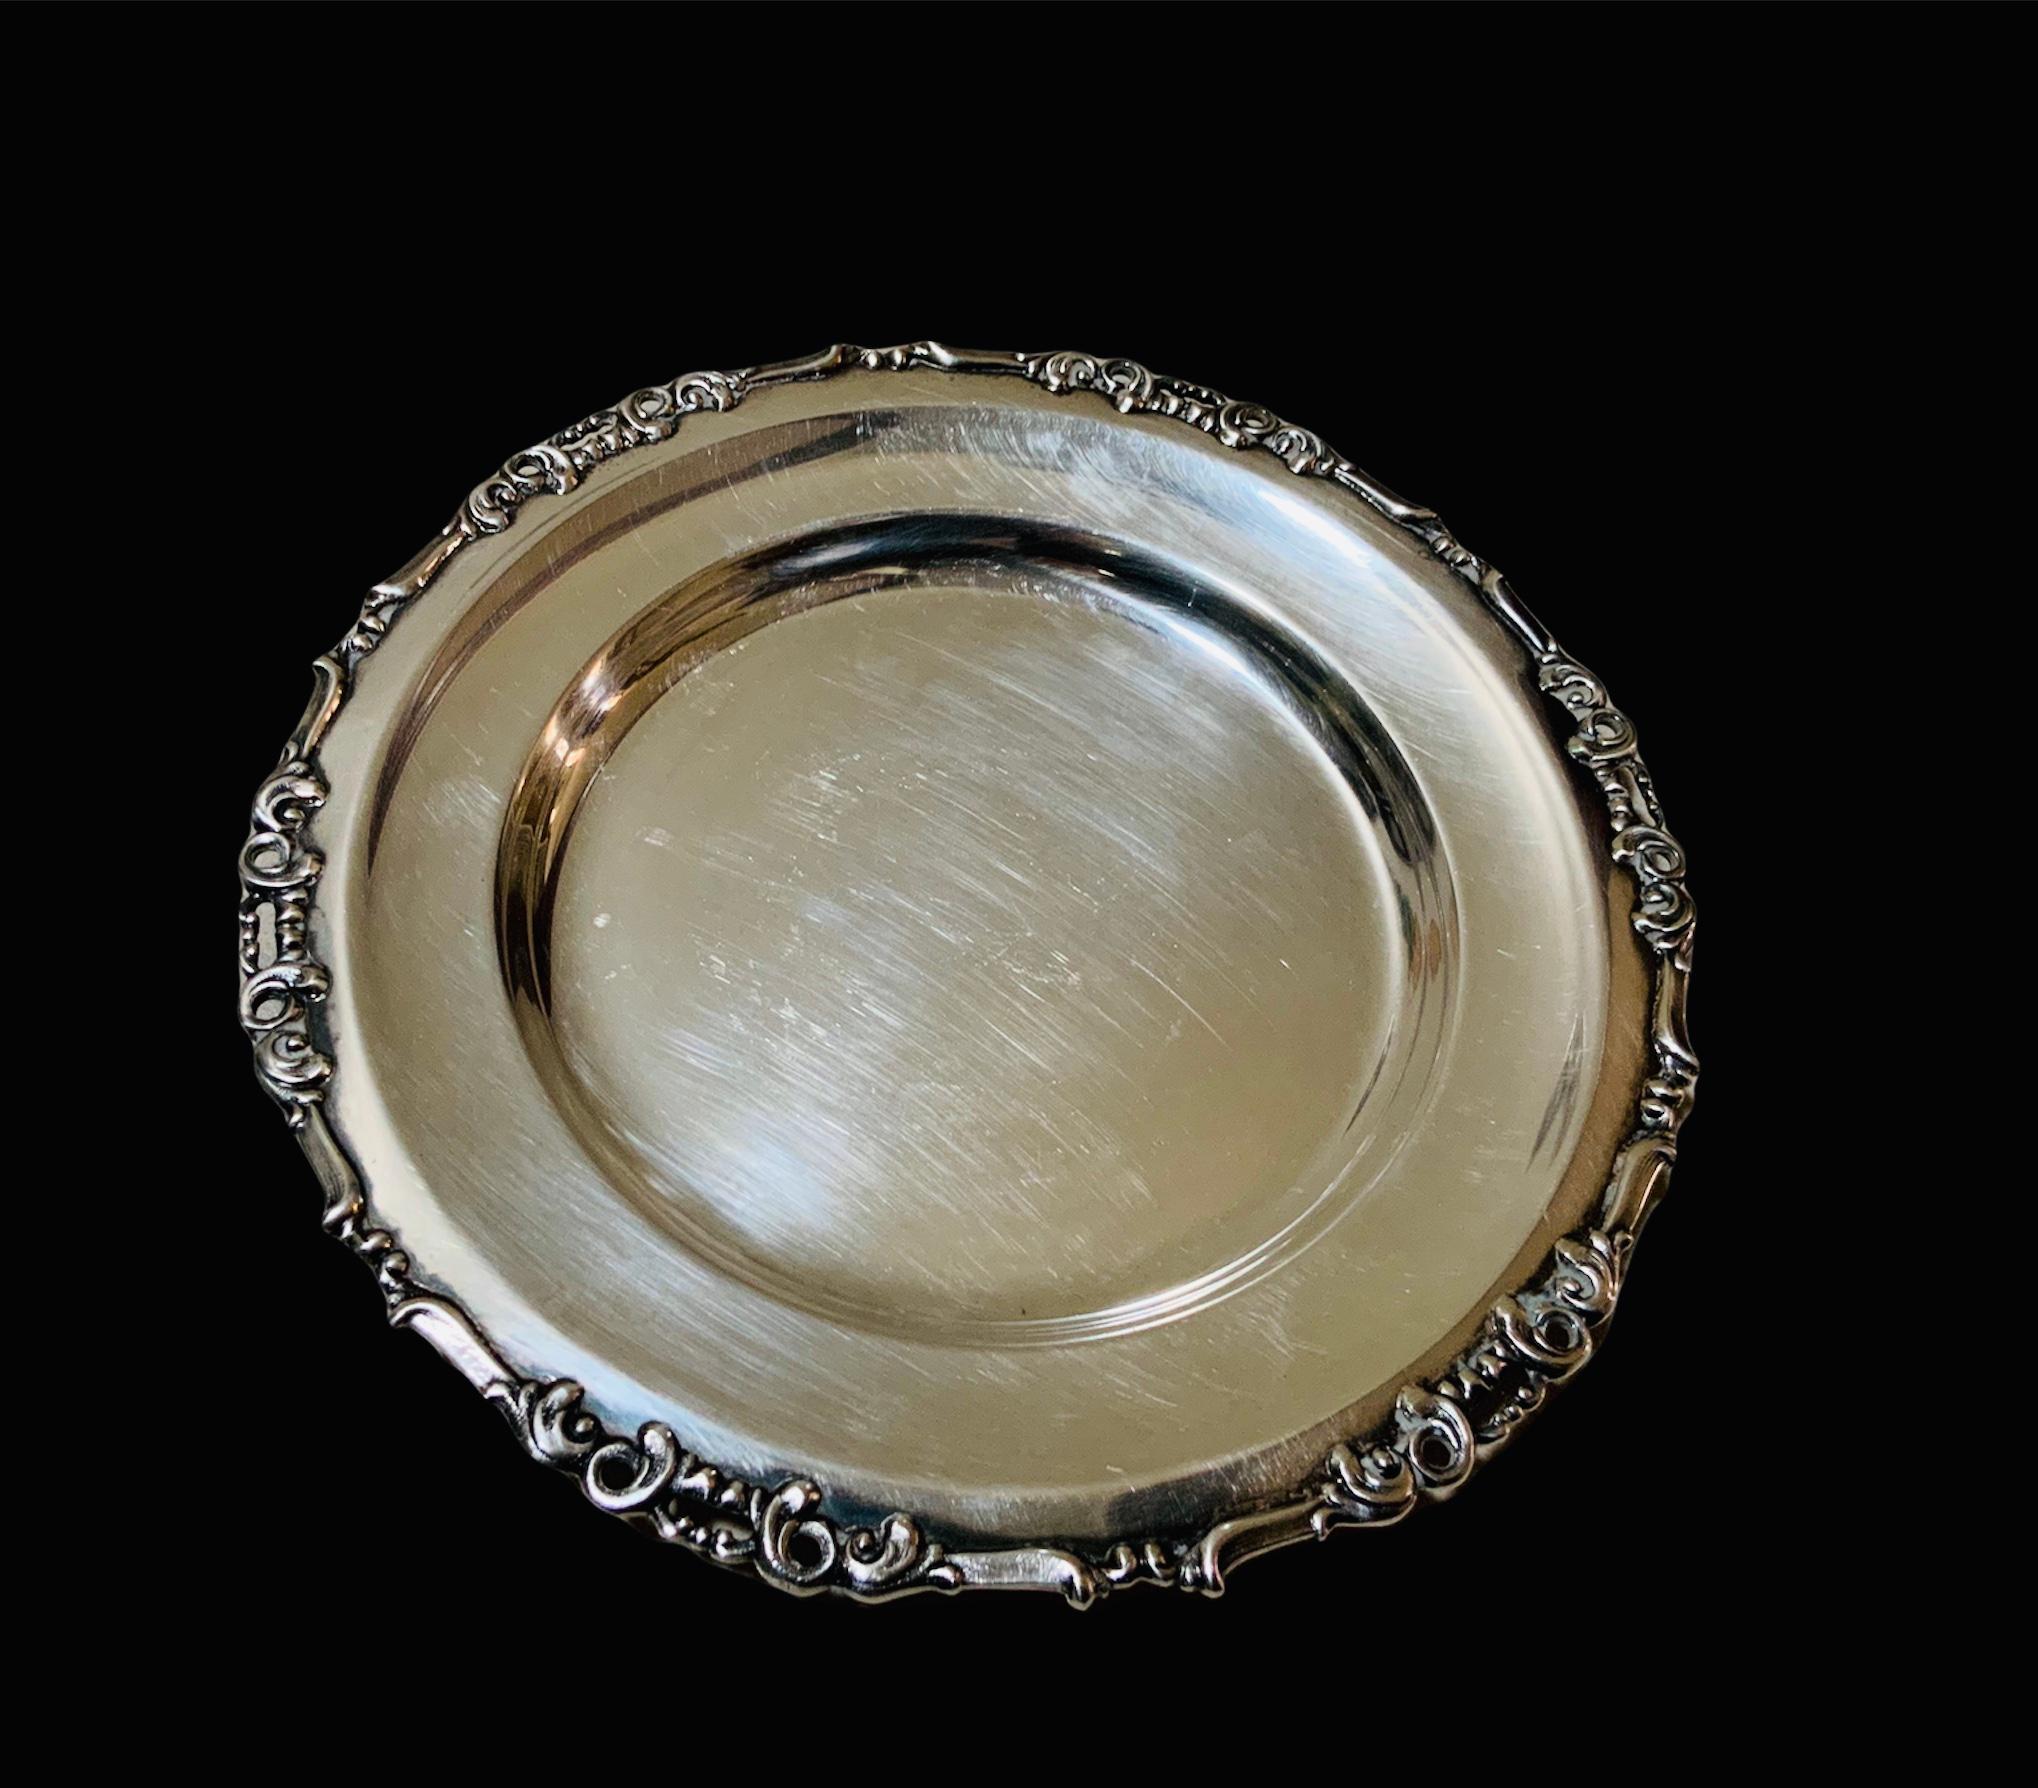 Repoussé Set of Camusso 925 Sterling Cups, Saucers and Bread/Butter or Appetizer Plates